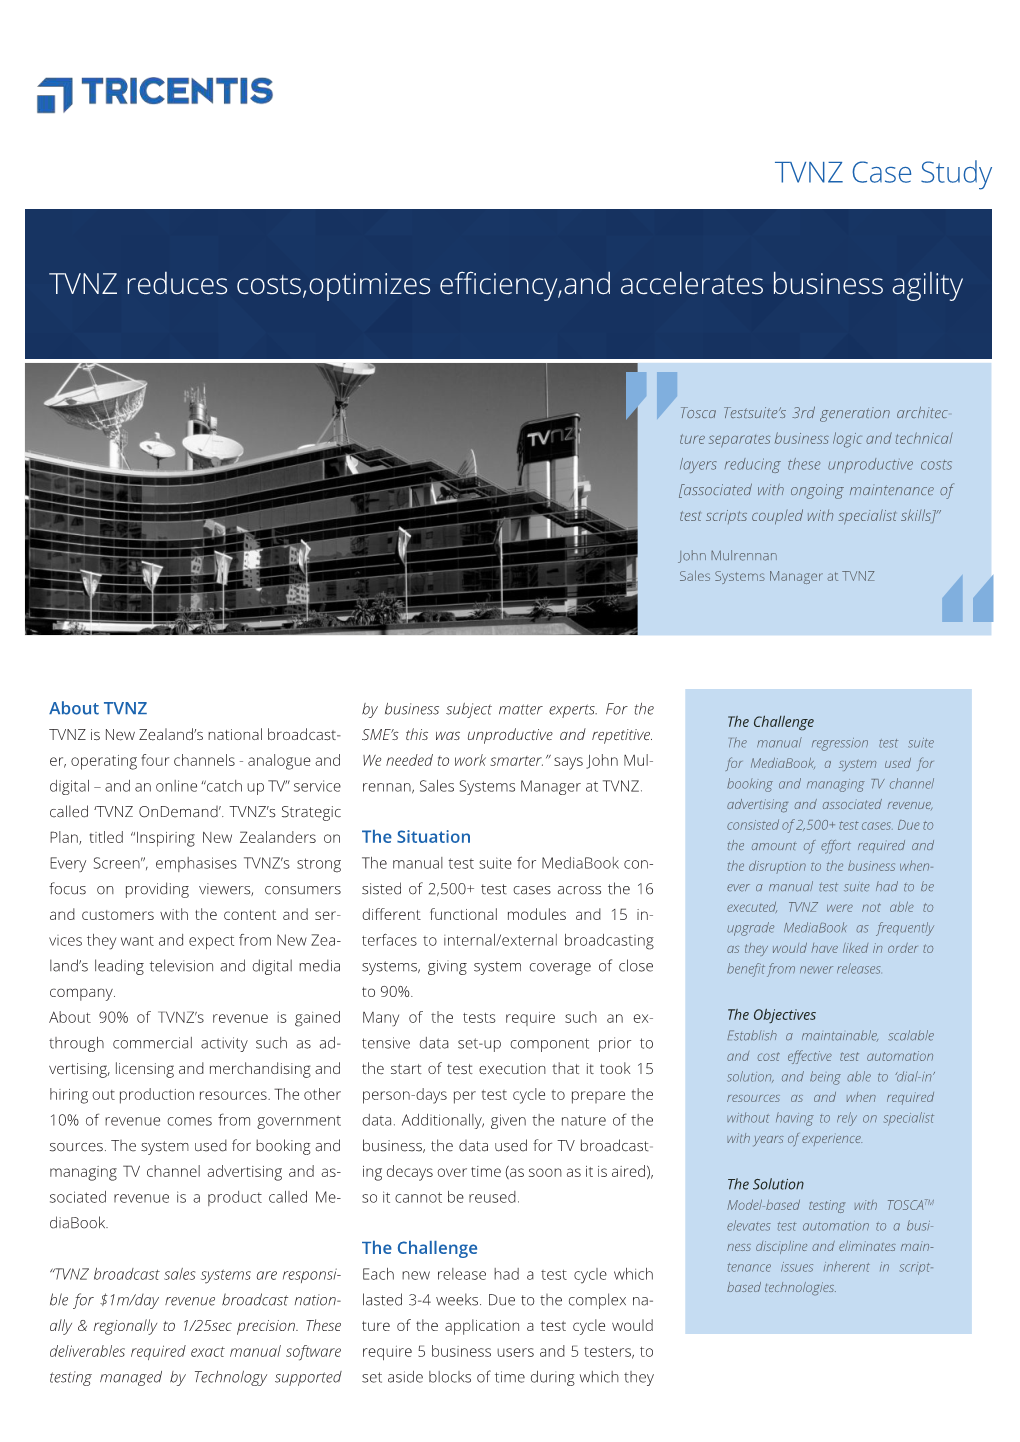 TVNZ Reduces Costs,Optimizes Efficiency,And Accelerates Business Agility